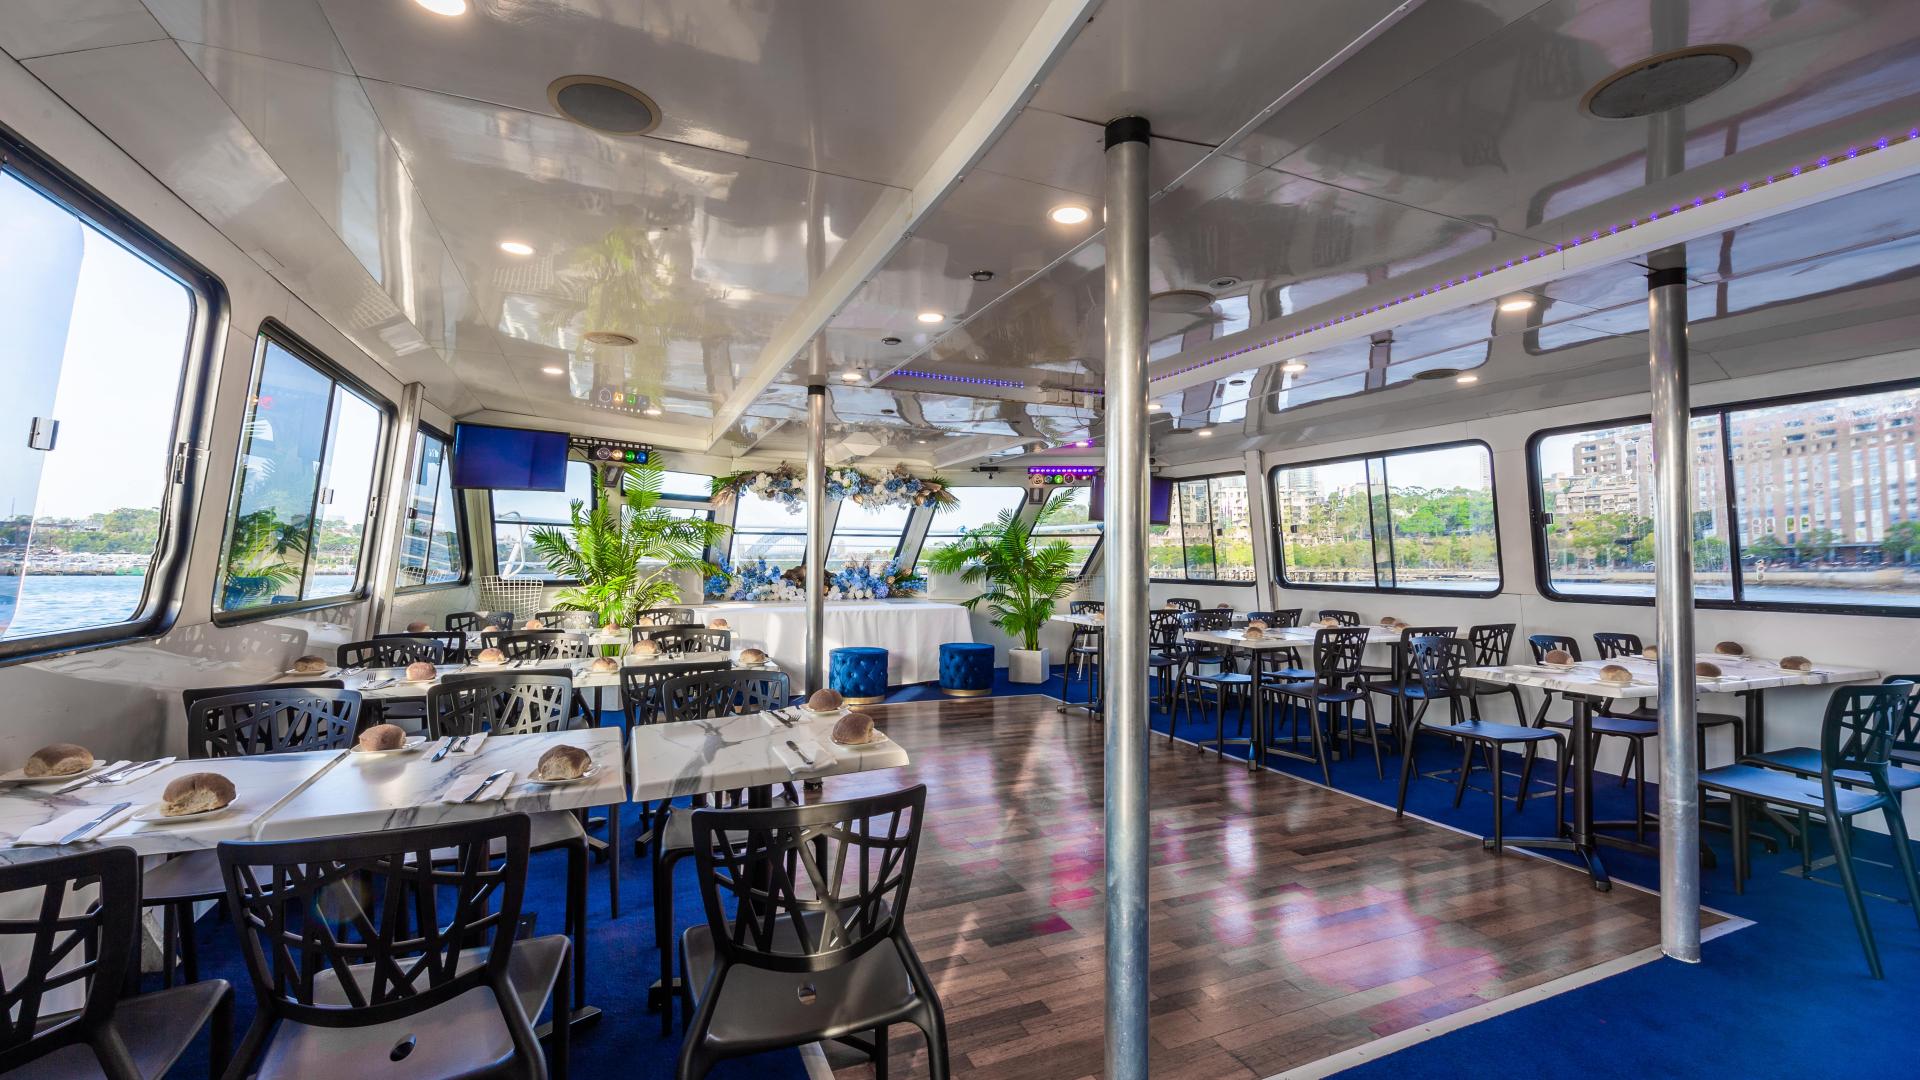 Dinner Cruises for Hire in Sydney